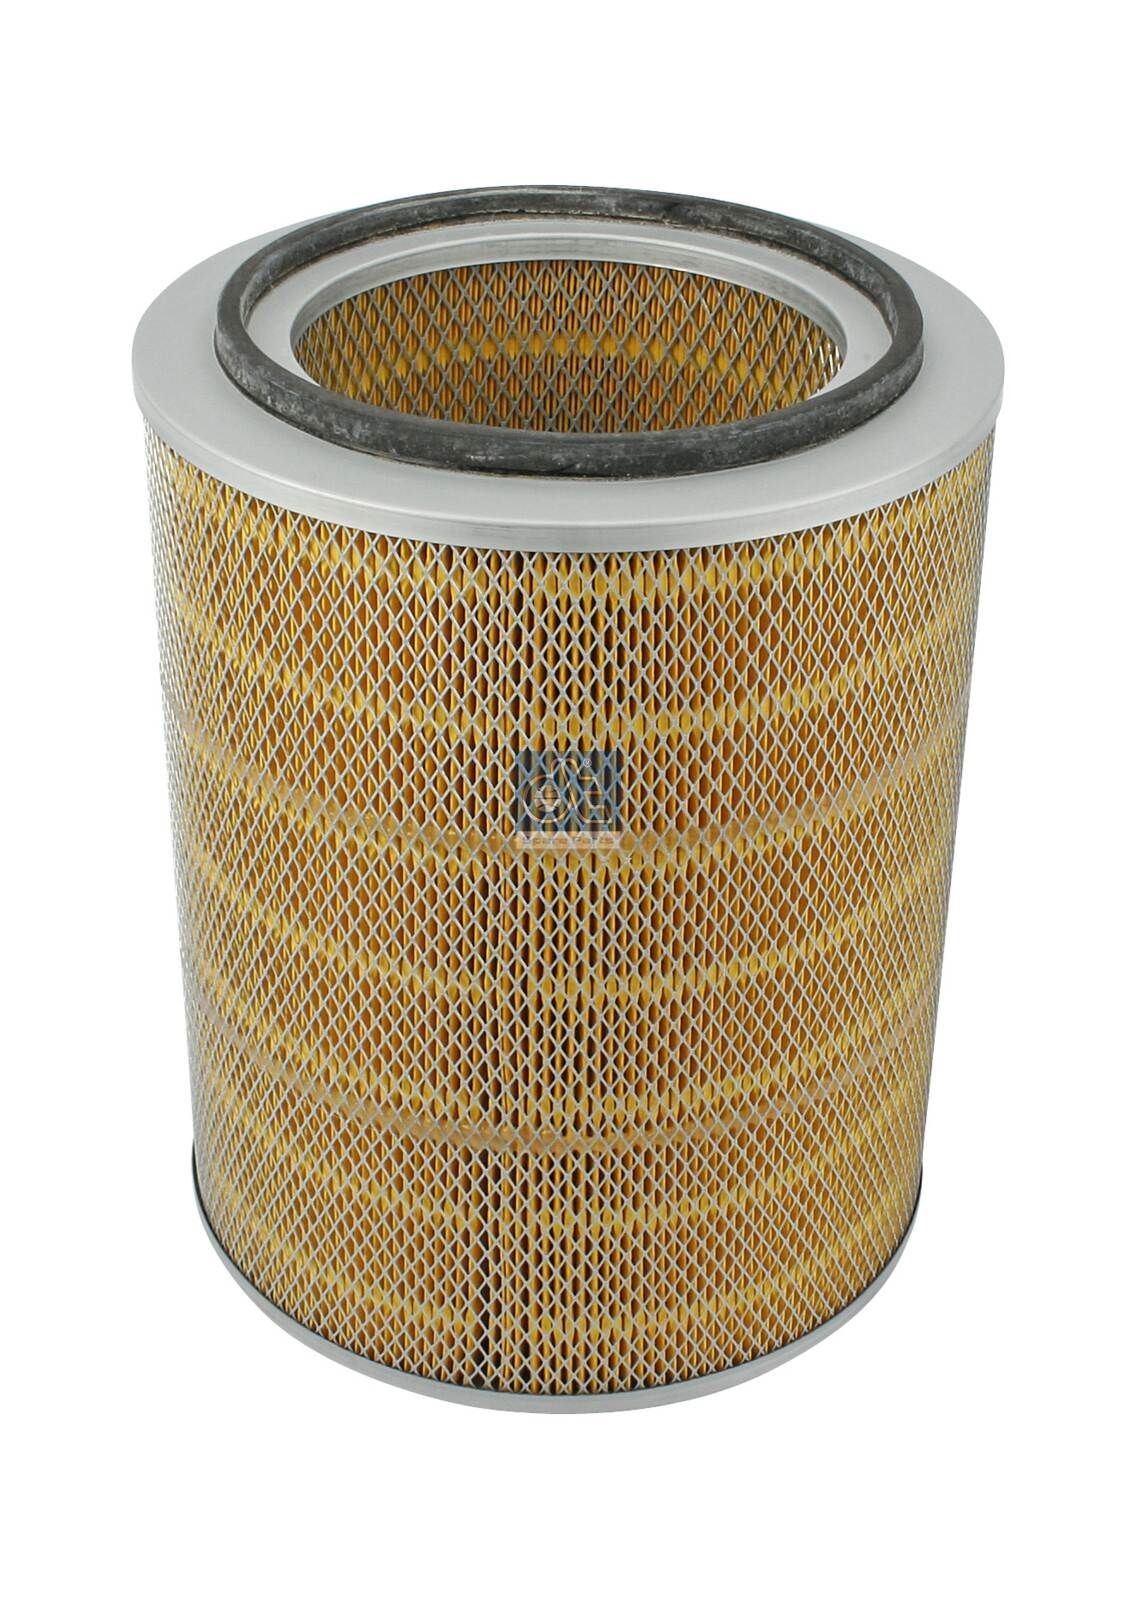 1.10301 DT Spare Parts Air filters FIAT 380mm, 302mm, Filter Insert